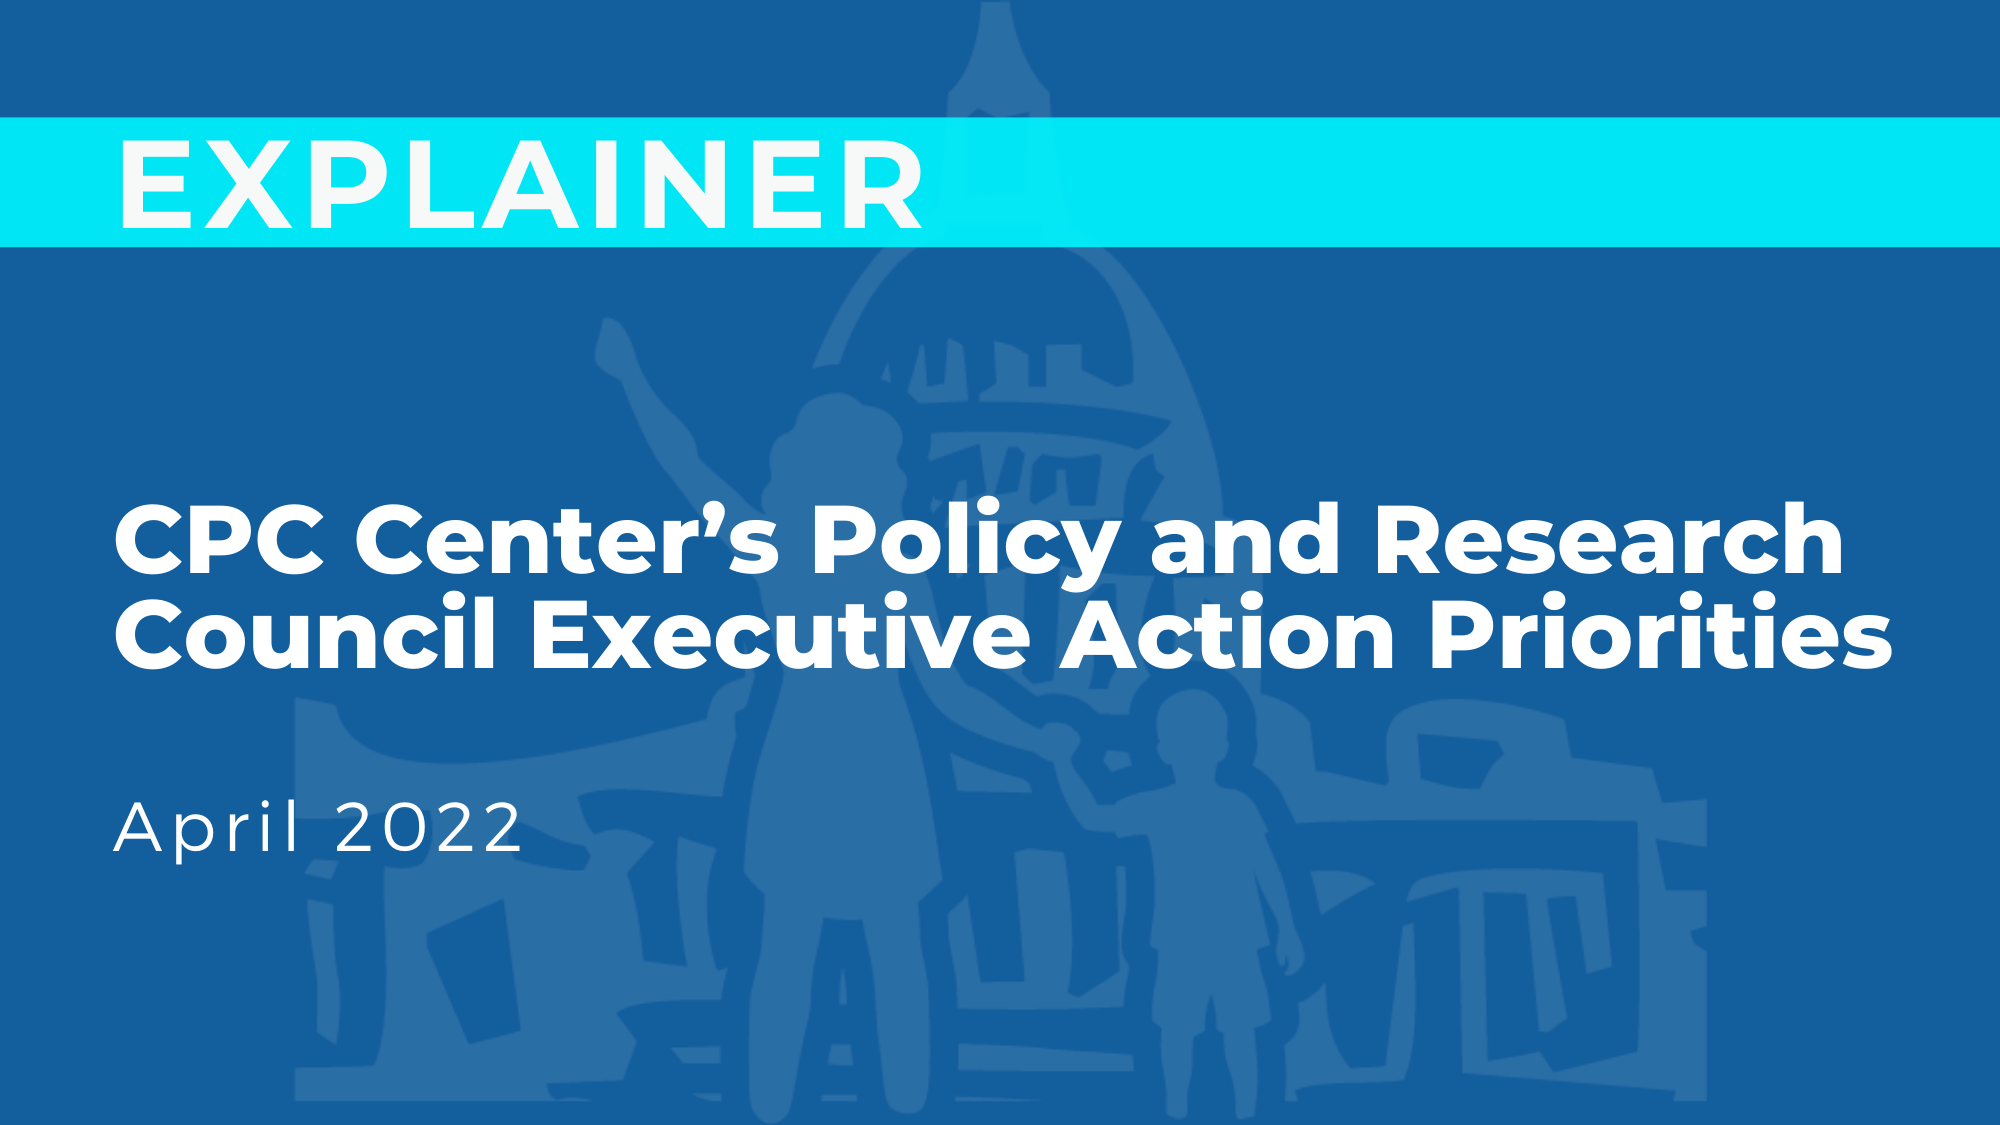 CPC Center's Policy and Research Council Executive Action Priorities